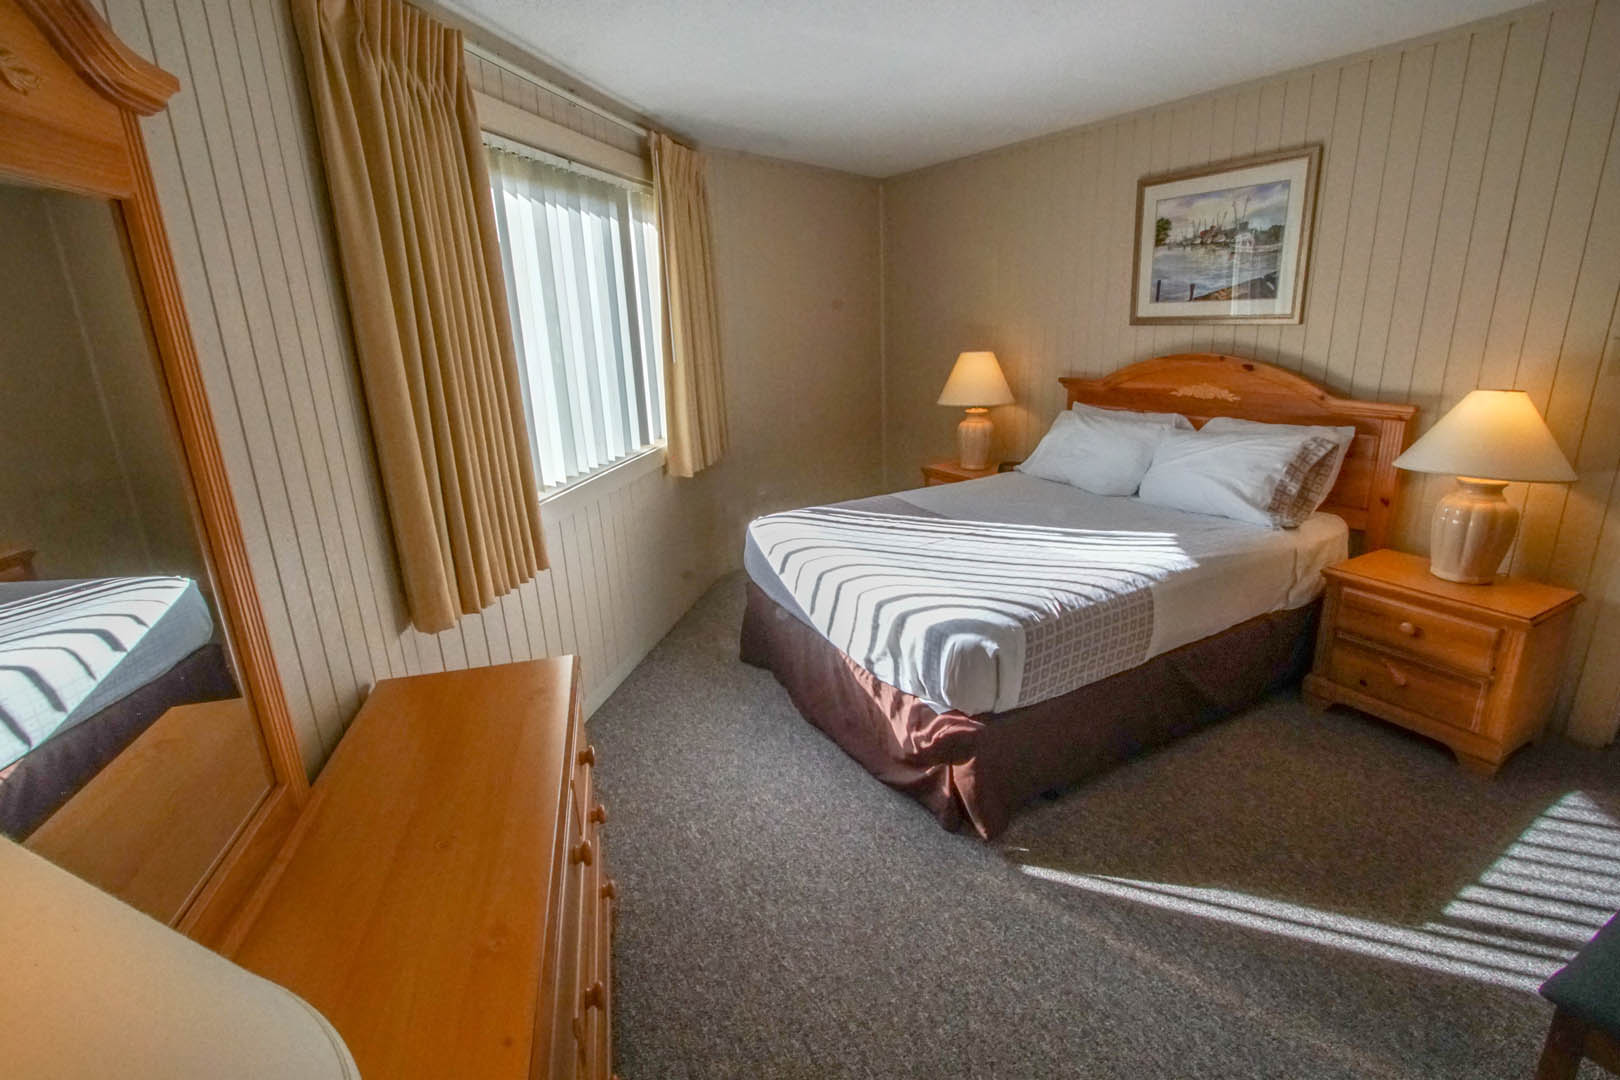 A cozy master bedroom at VRI's Outer Banks Beach Club in North Carolina.